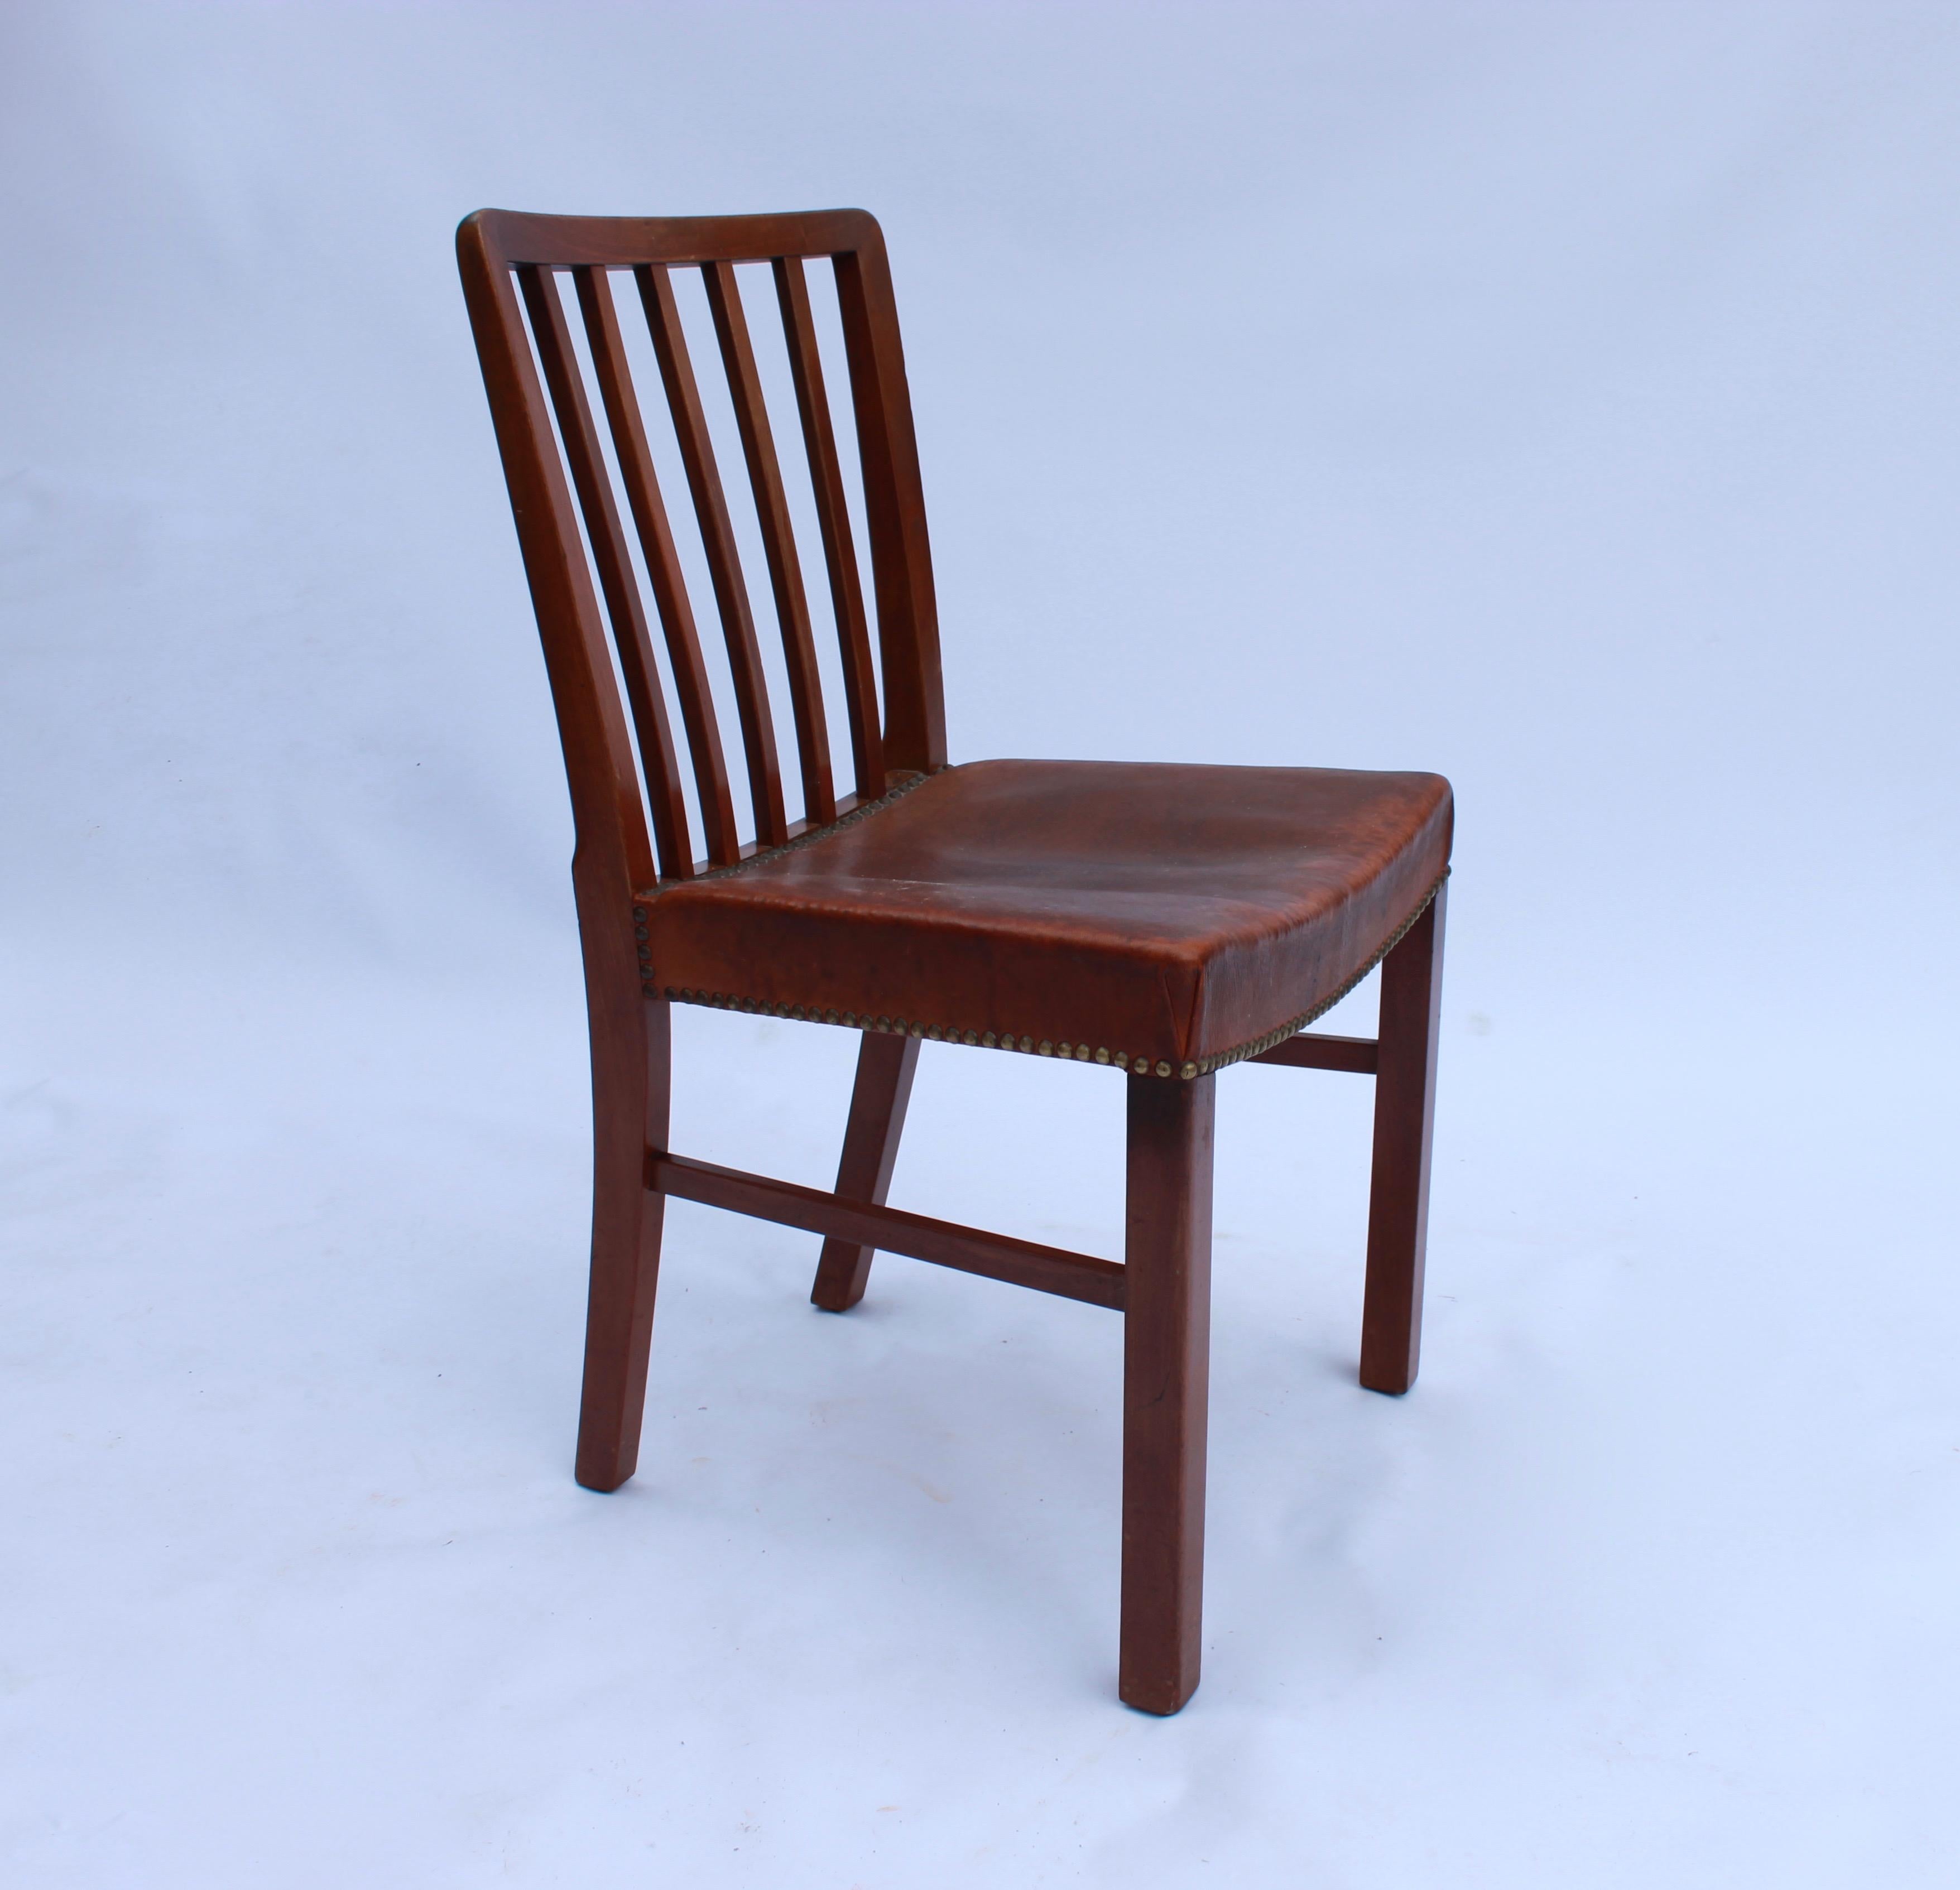 Set of 6 dining chairs in light mahogany and originally upholstered with patinated leather by Fritz Hansen from the 1940s. The chairs are in great vintage condition.

This product will be inspected thoroughly at our professional workshop by our